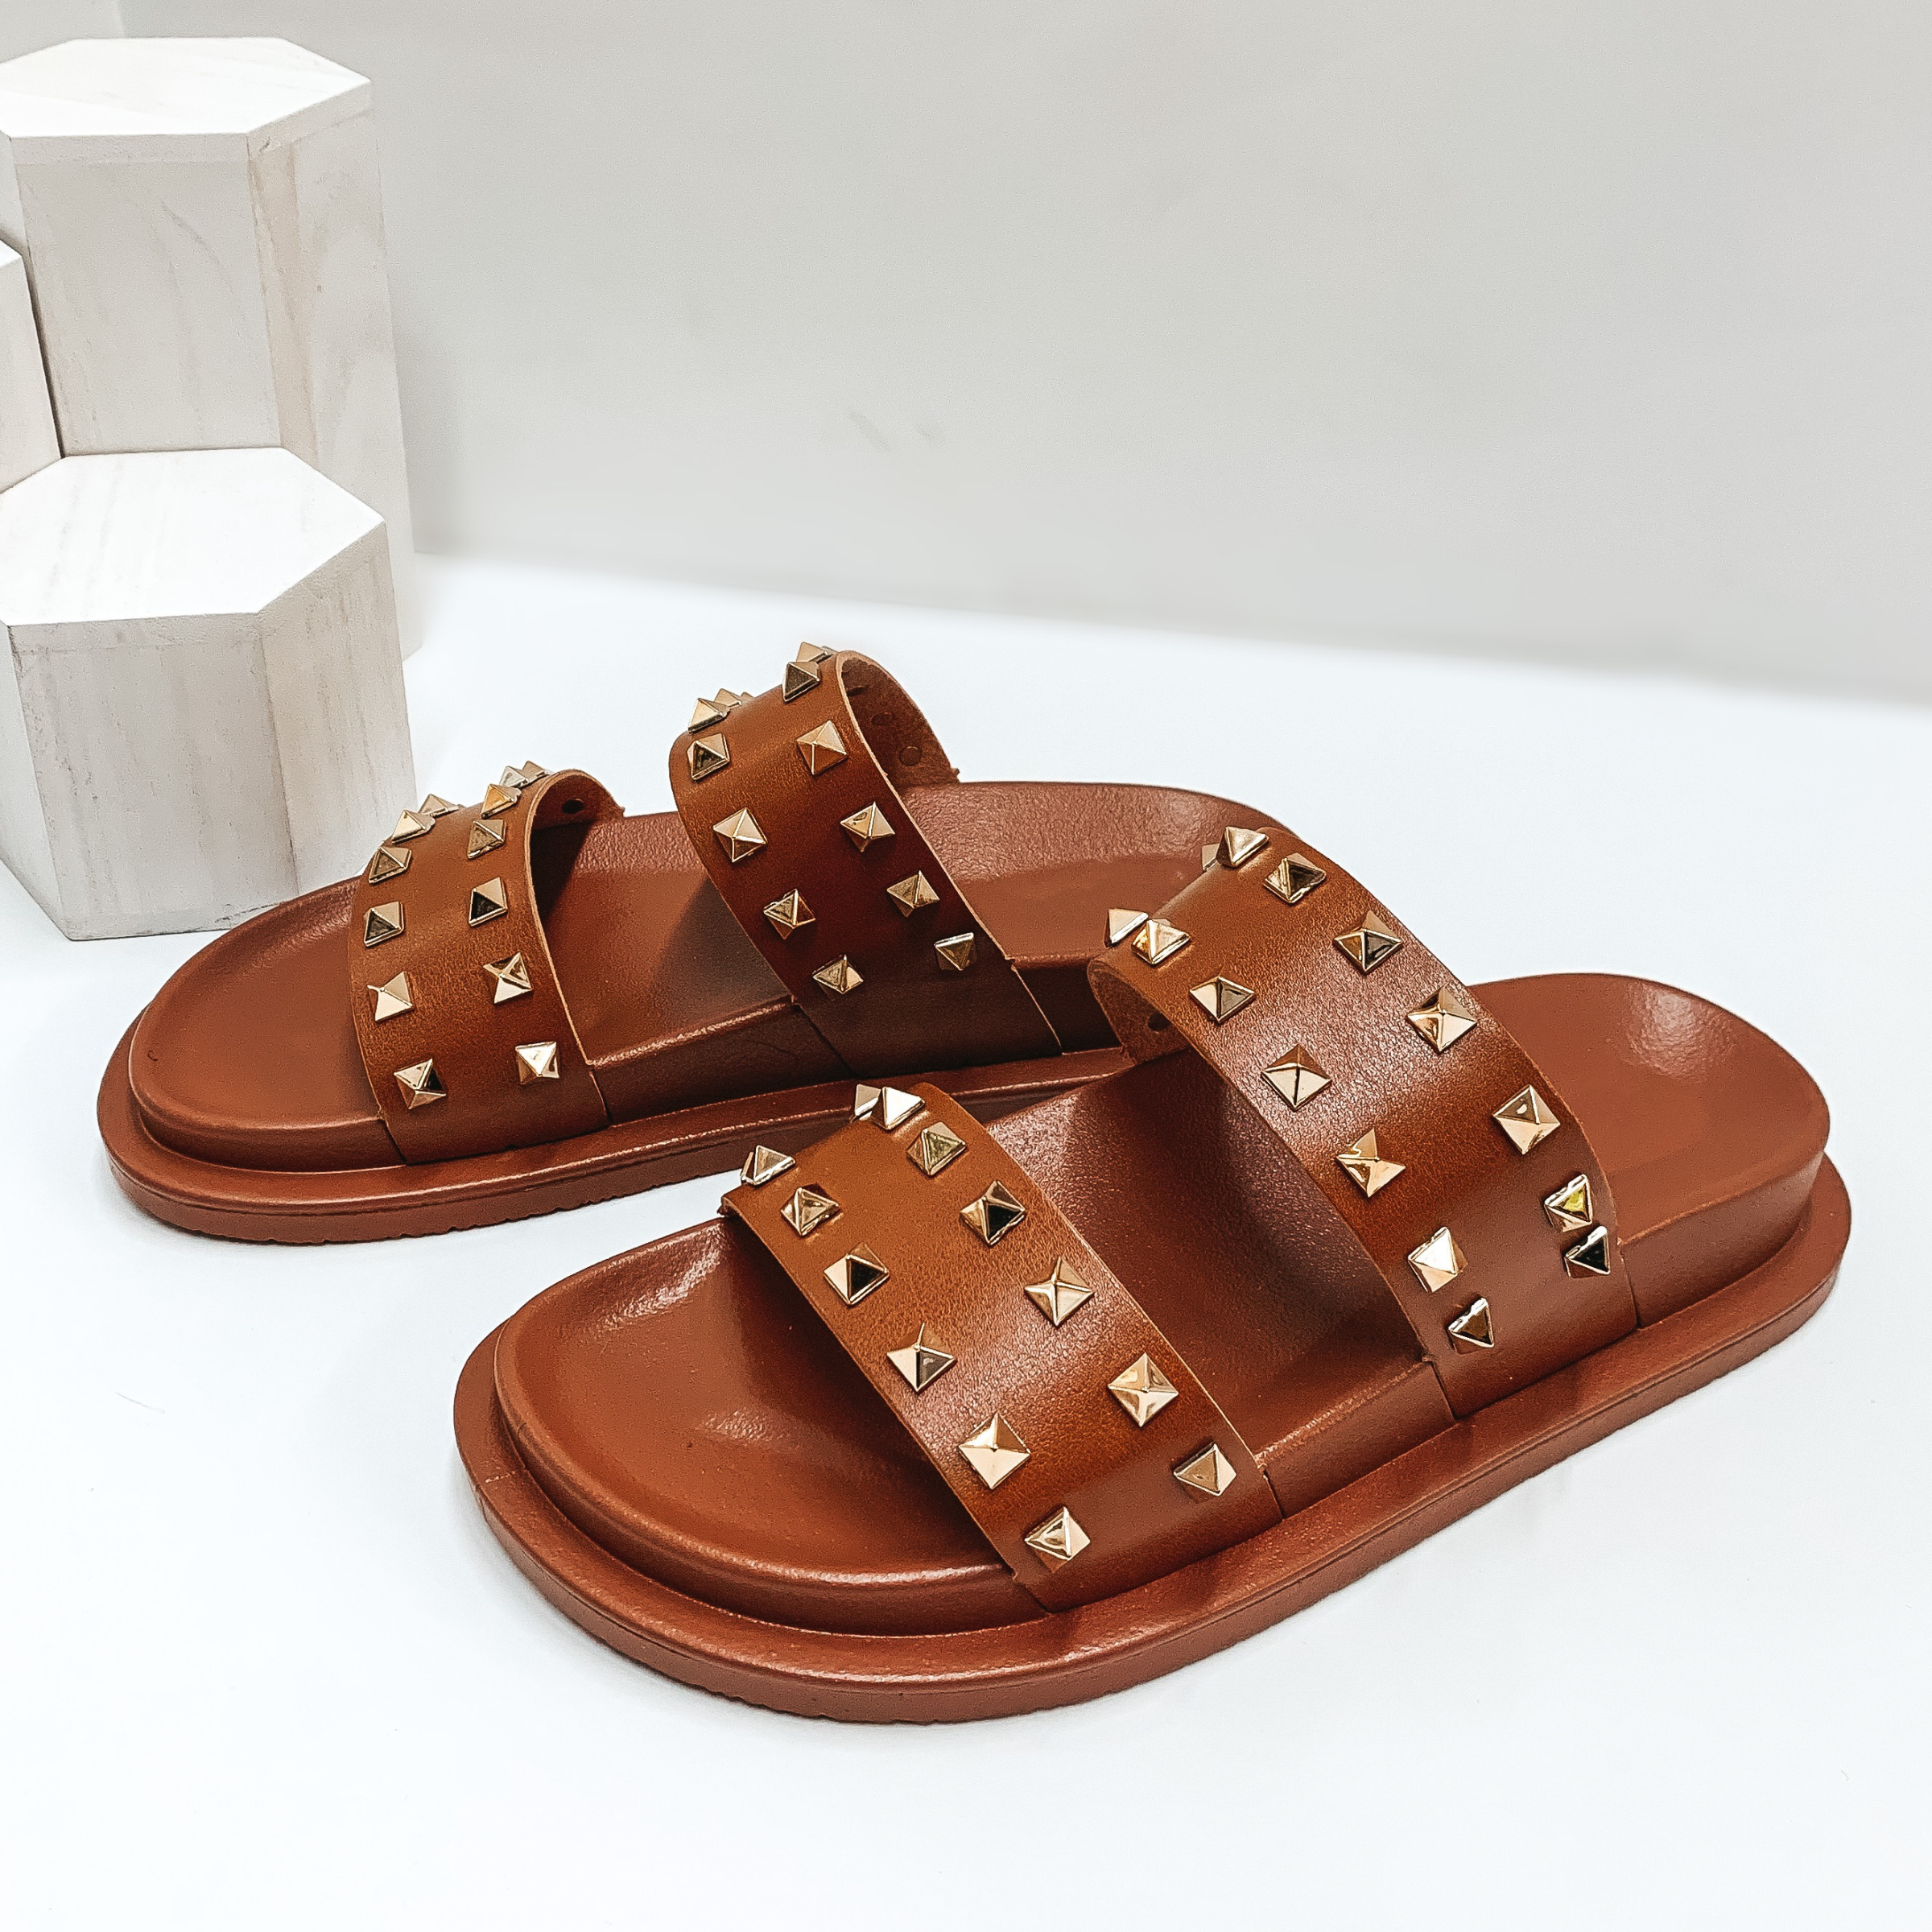 Simple Essentials Studded Two Strap Slide On Sandals in Cognac - Giddy Up Glamour Boutique